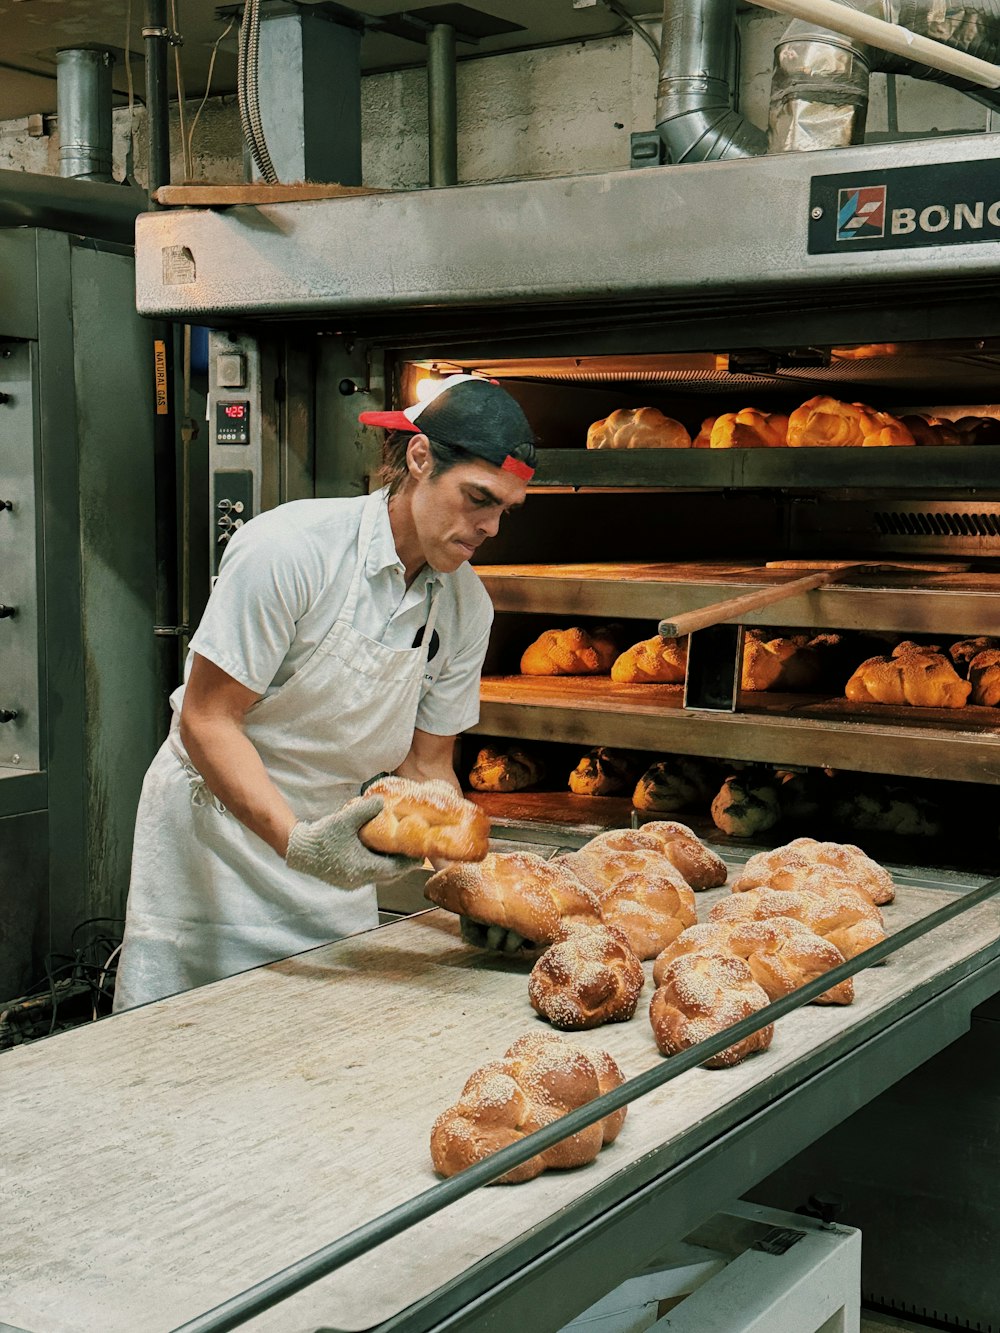 a man in a white shirt is putting some bread in the oven